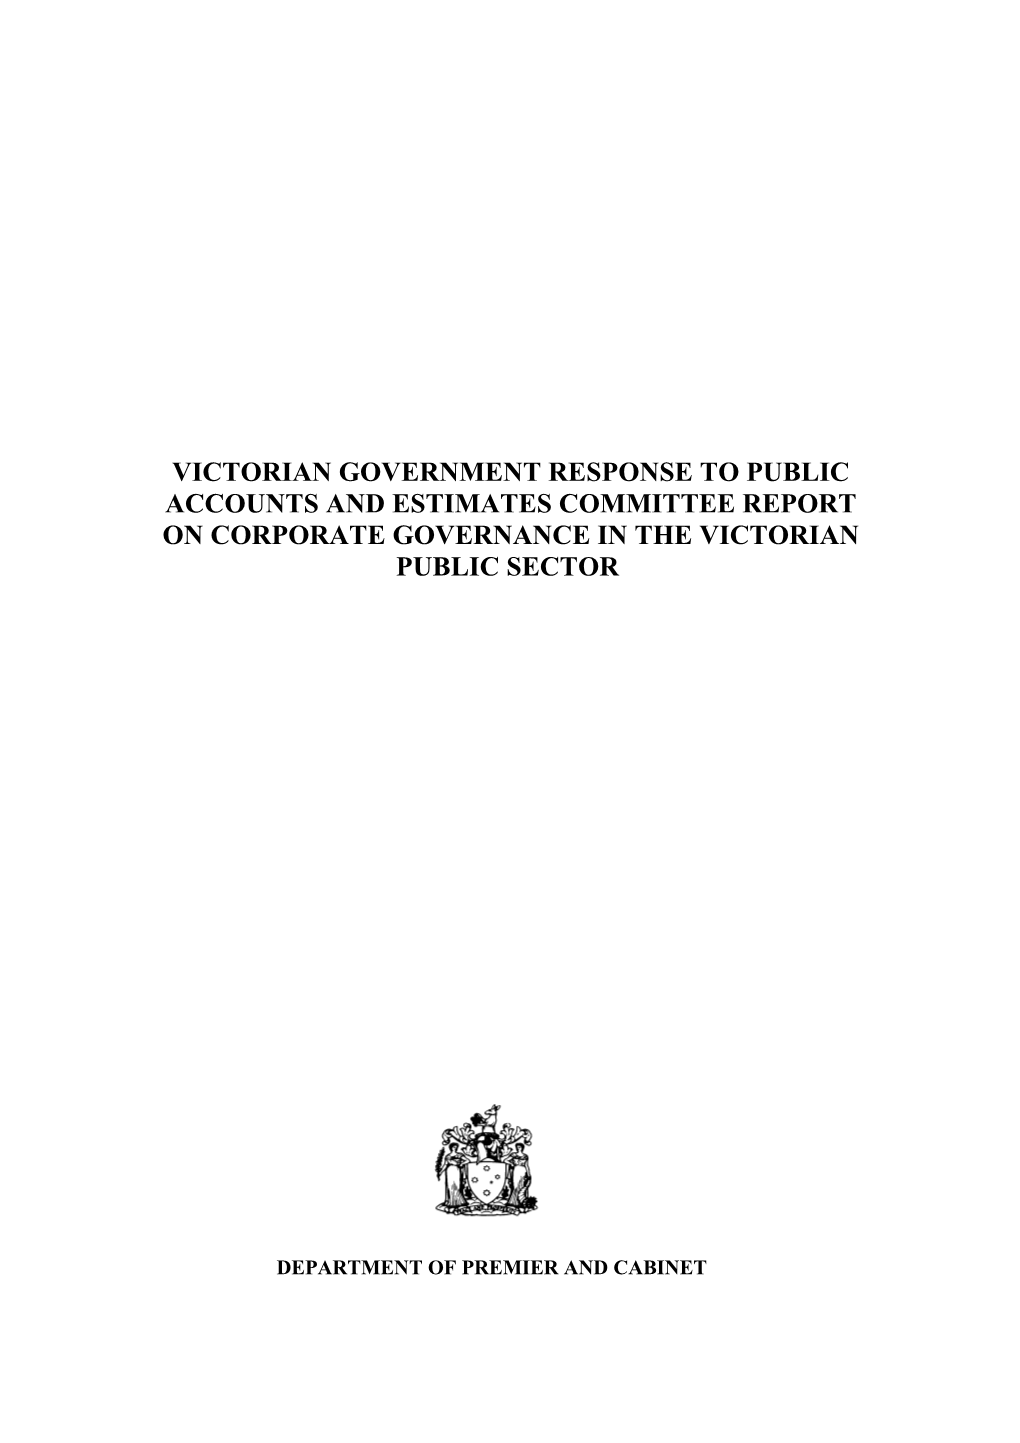 Victorian Government Submission to Paec Inquiry Into Corporate Governance in the Public Sector